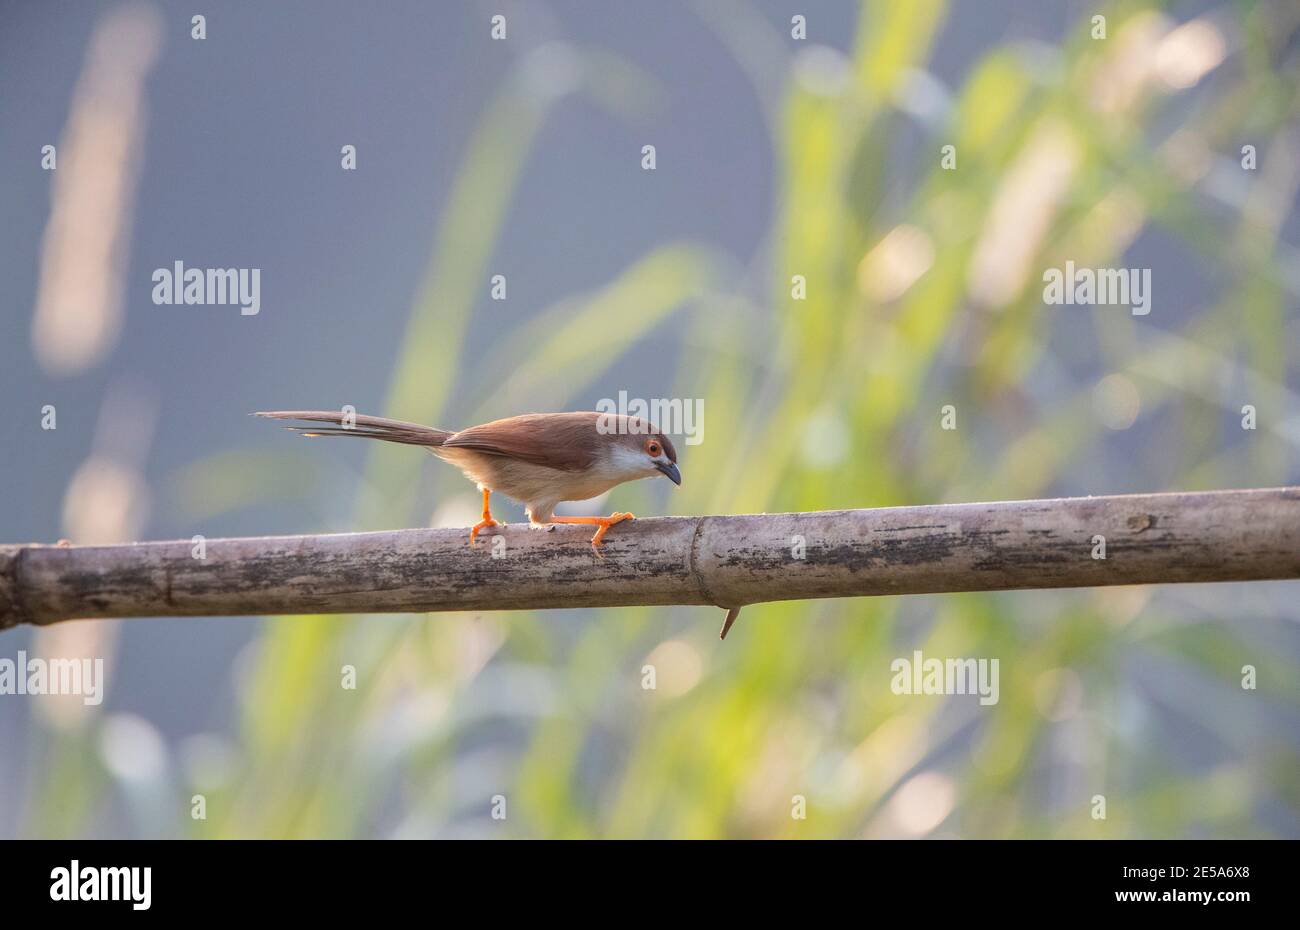 Oriental yellow-eyed babbler, Yellow-eyed babbler (Chrysomma sinense), perched on bamboo, China Stock Photo